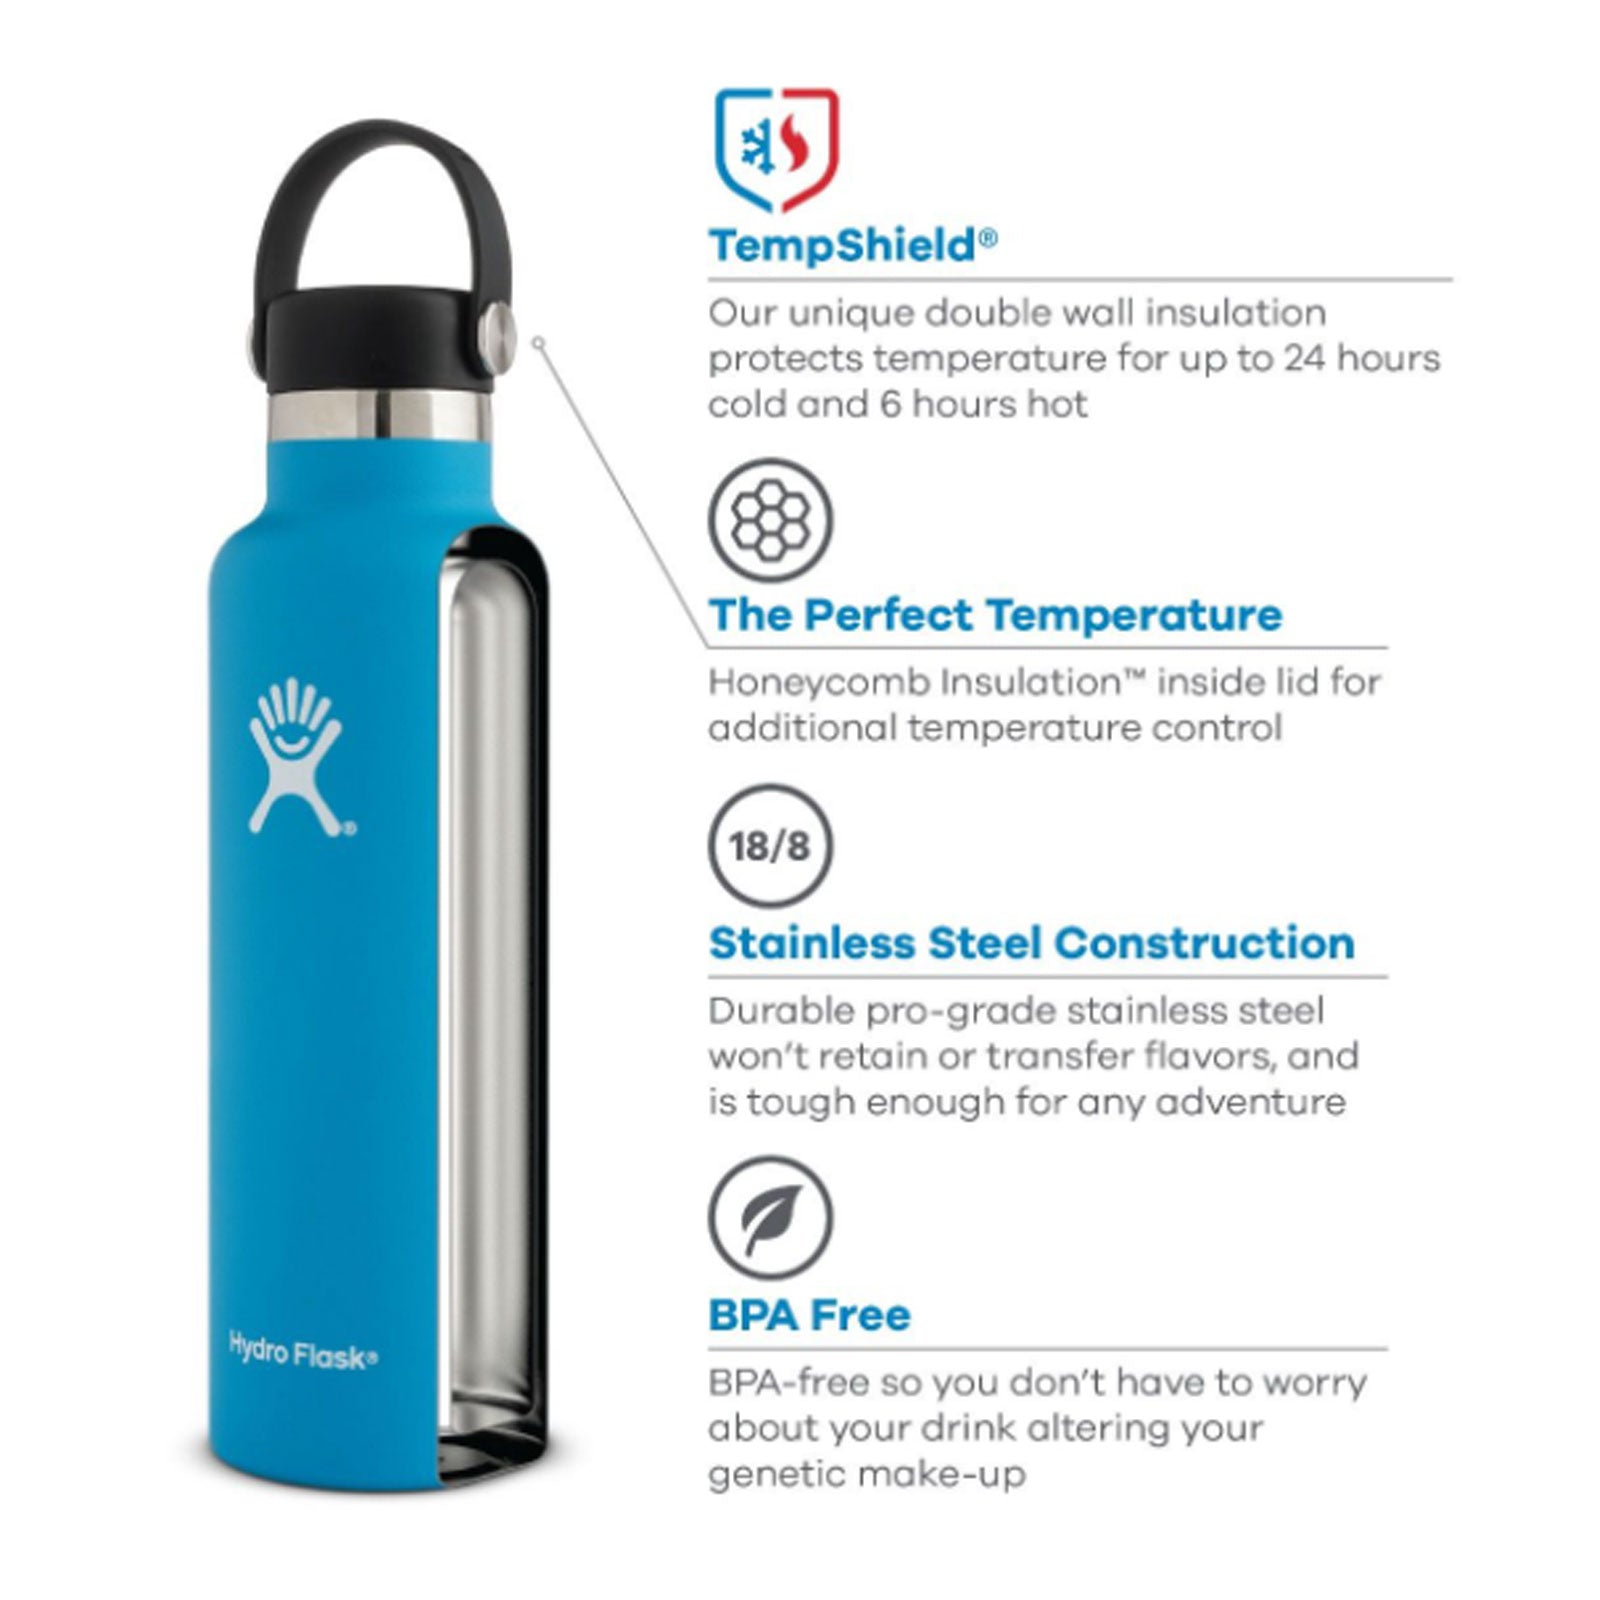 HydroFlask Standard Mouth with Flex Cap 21 oz - Black Accessories - Drinkware - Canteens - The Heel Shoe Fitters